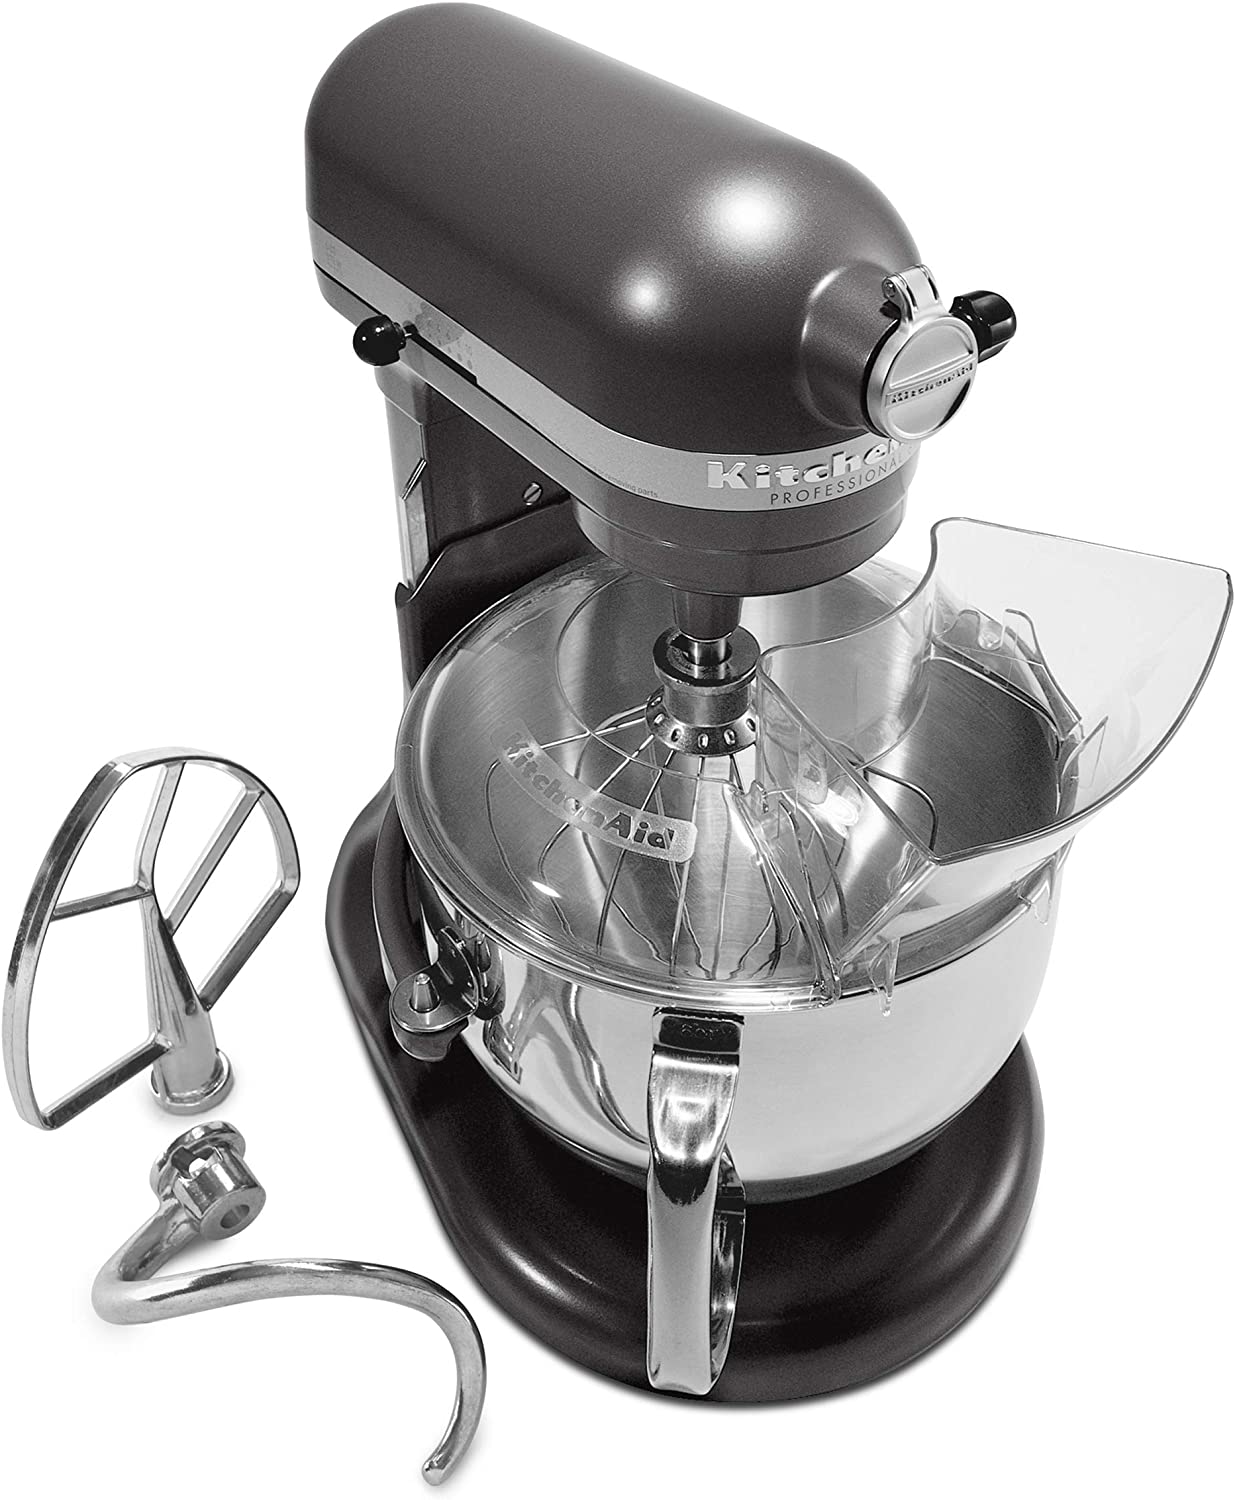 7 Quart Bowl-Lift Stand Mixer with Redesigned Premium Touchpoints